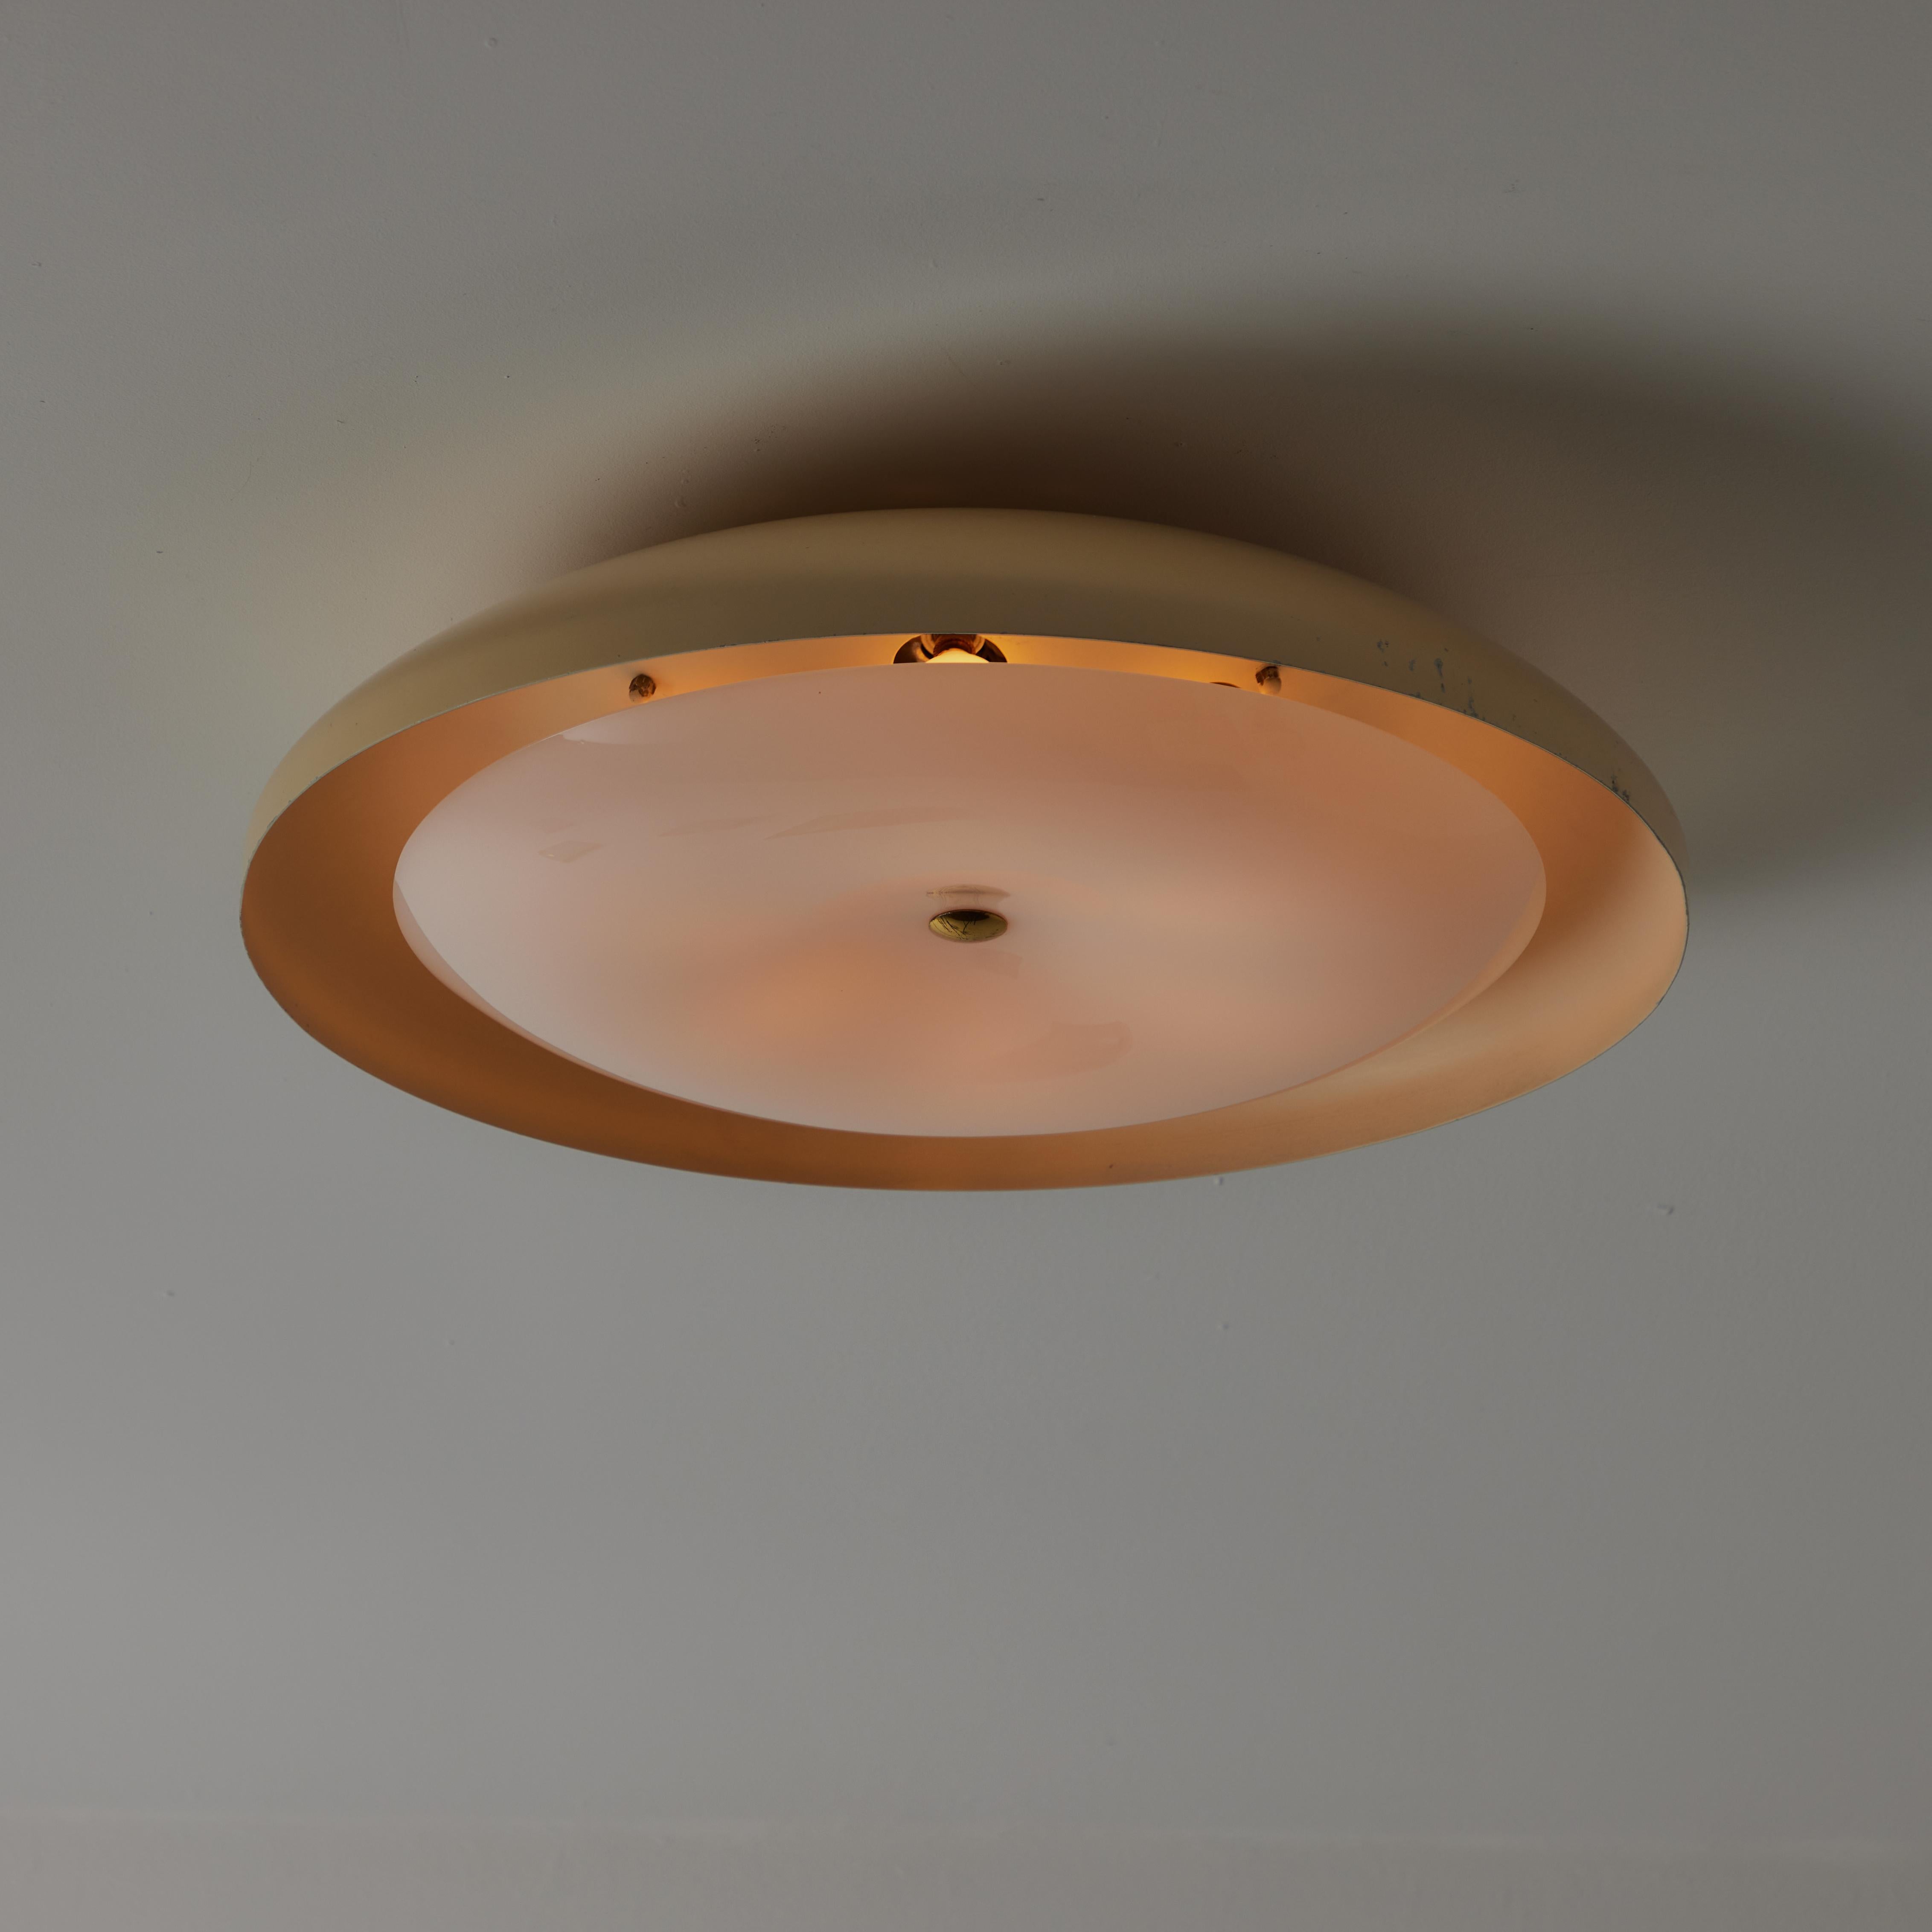 Model 3020 Flush Mount by Gino Sarfatti for Arteluce. Italy circa the 1960s. Molded lucite diffuser with a center dimple; adding dimensional intrigue. The light holds seven e14 socket types adapted for the US. We recommend 15-25 w bulbs or LED